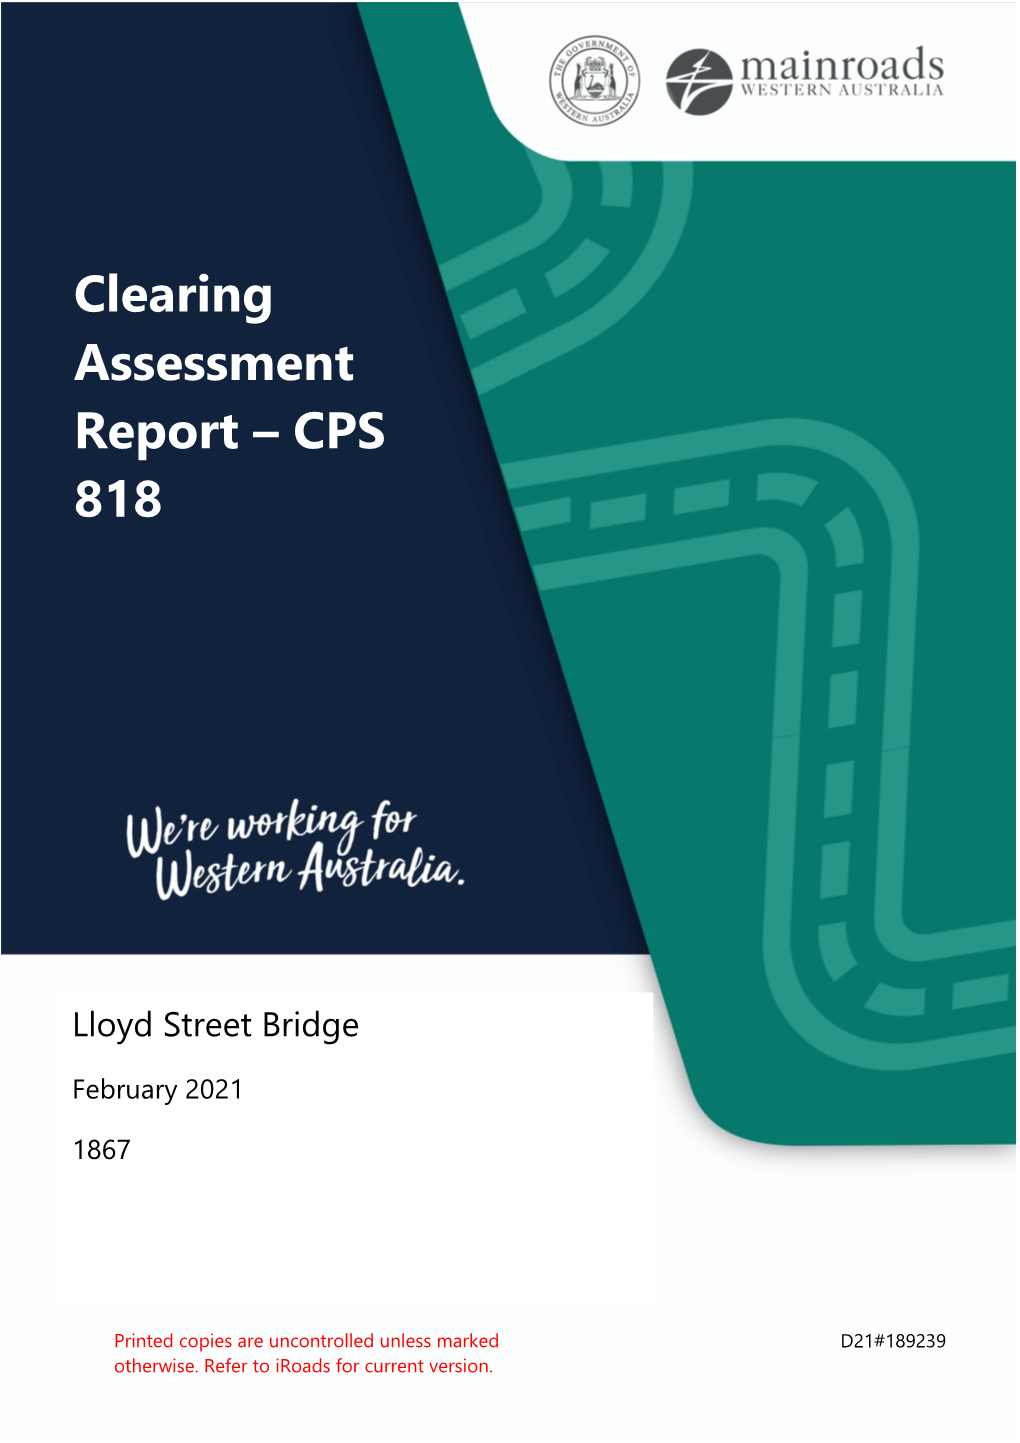 Clearing Assessment Report – CPS 818